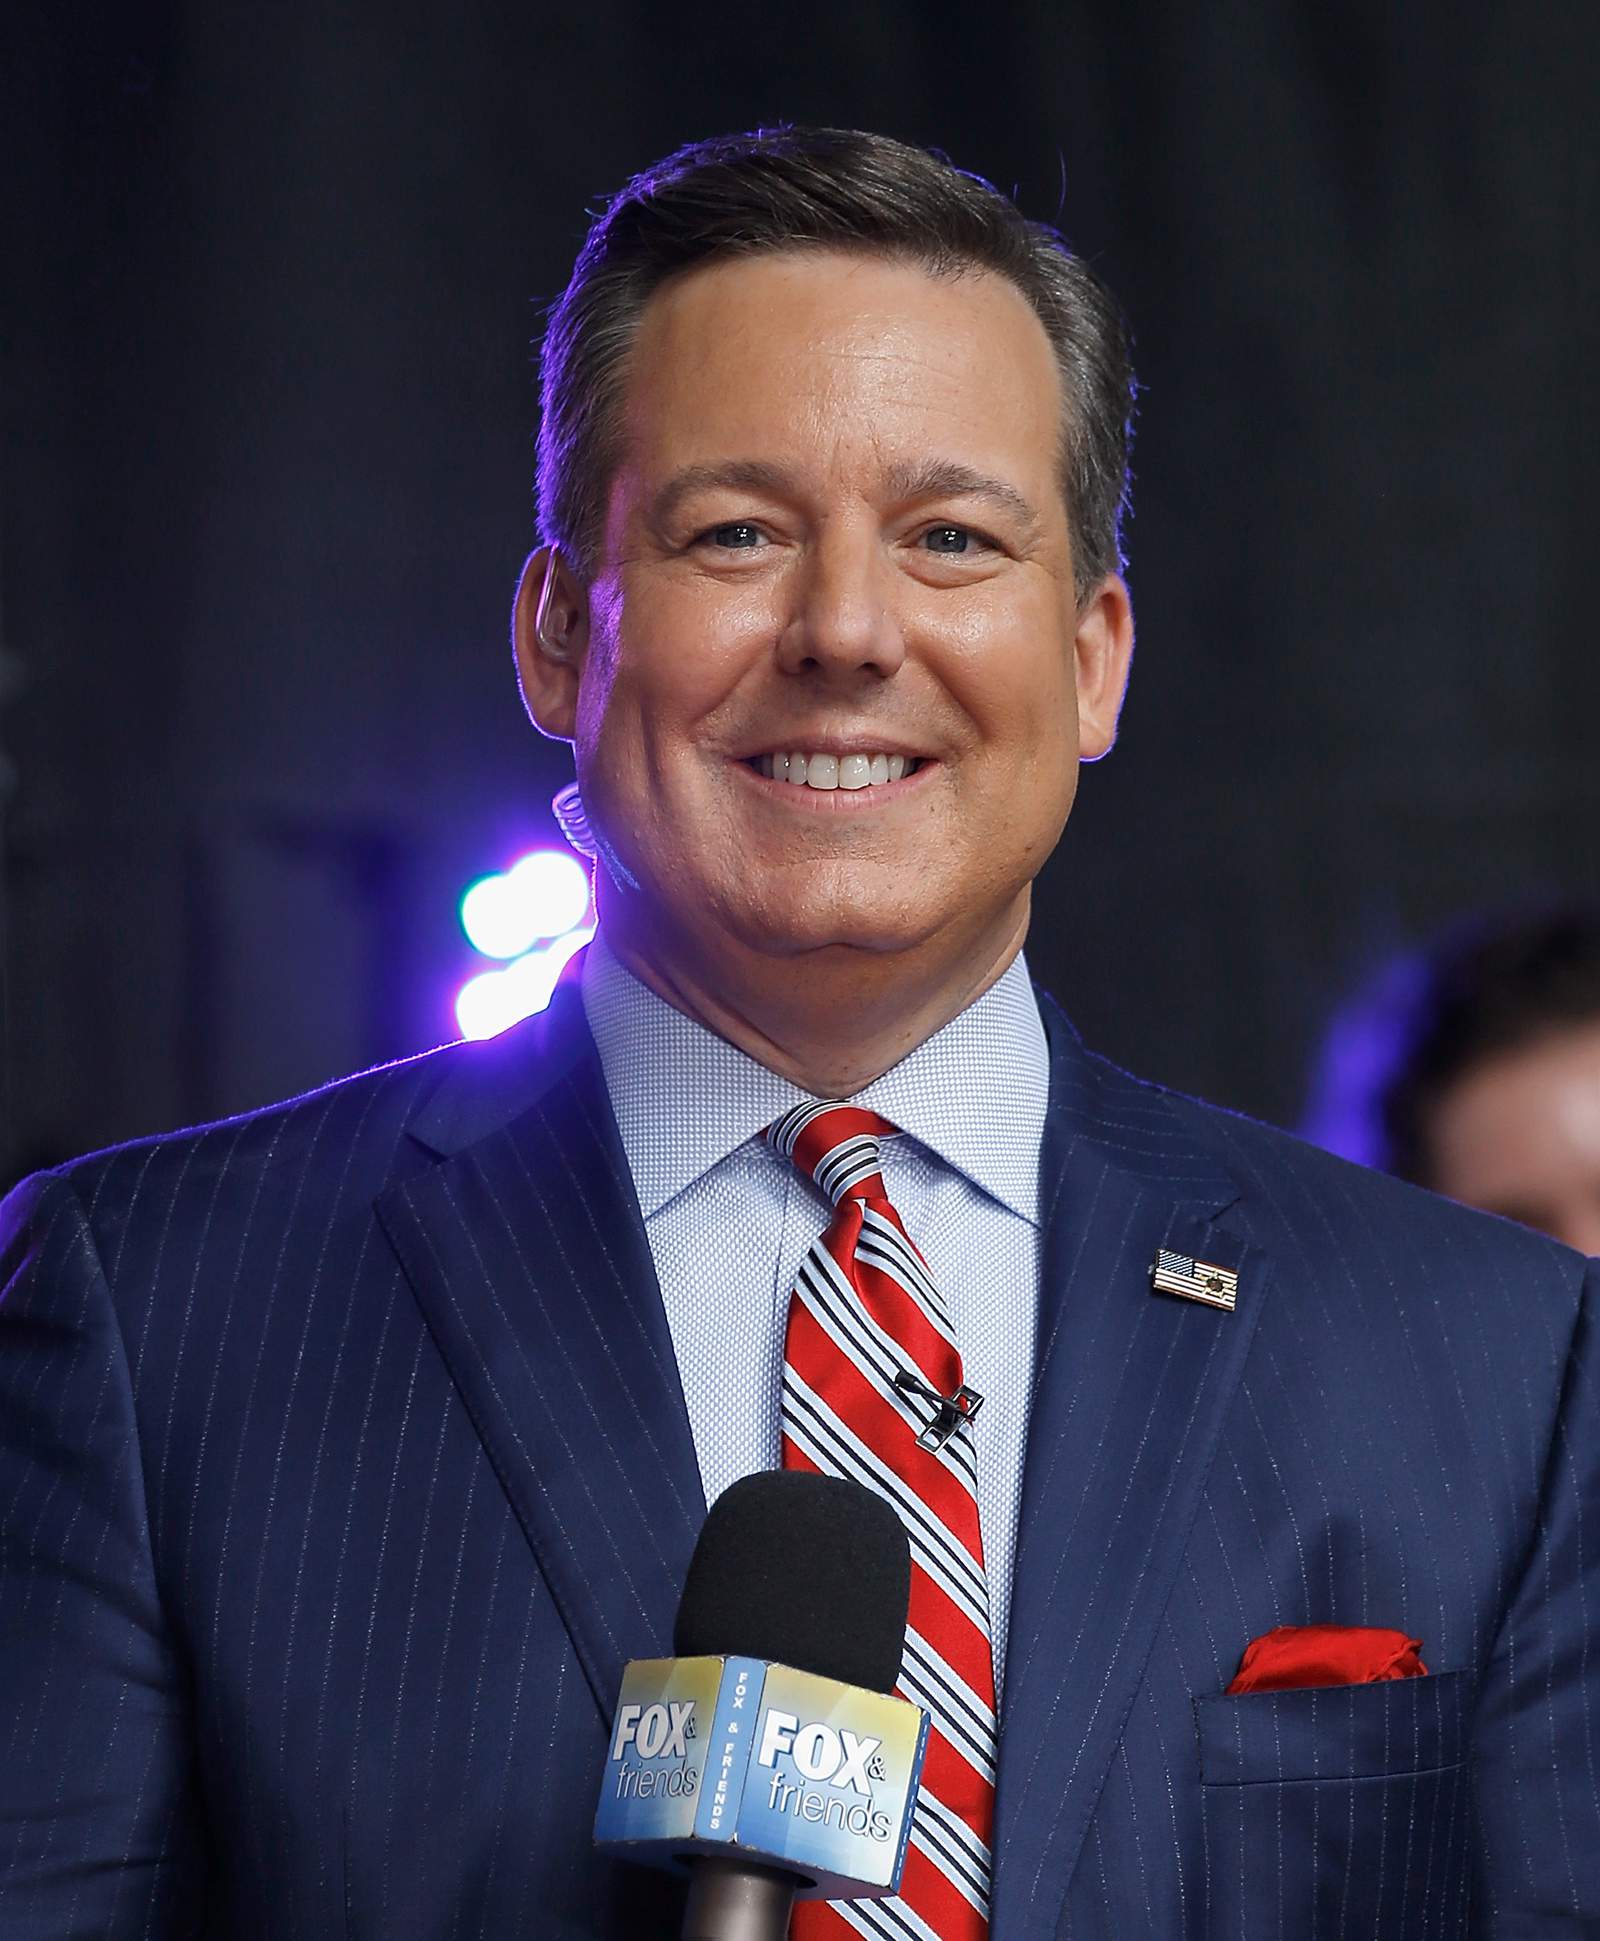 Fox News fires Ed Henry after sexual misconduct charge